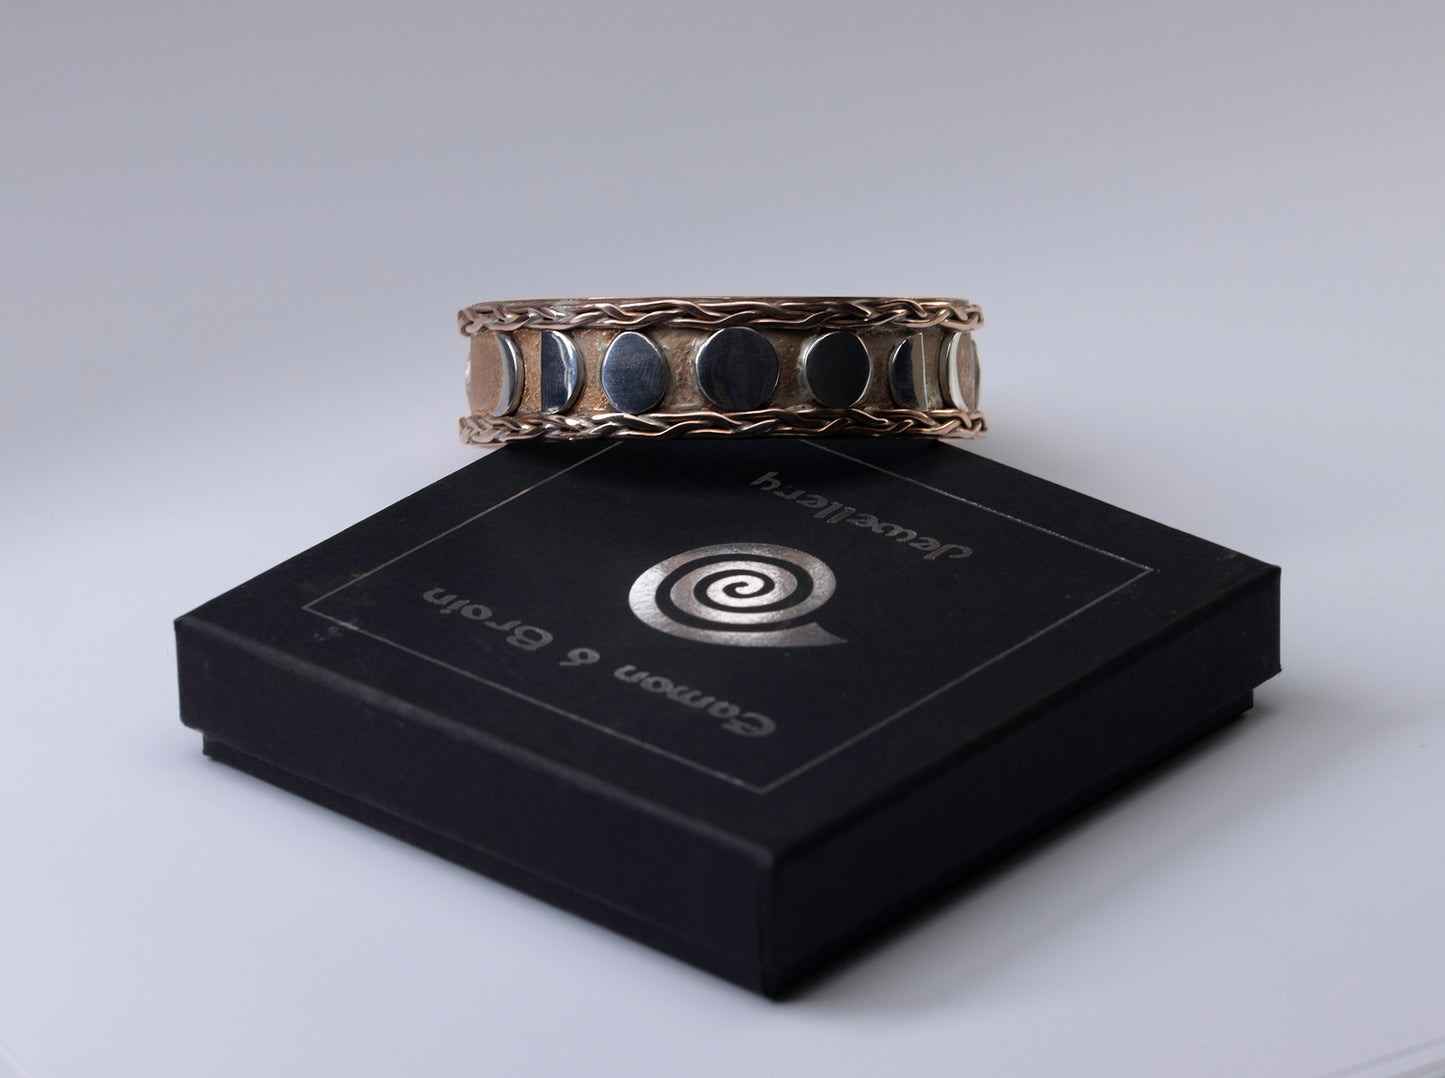 Phases of the Moon Bangle - copper & sterling silver